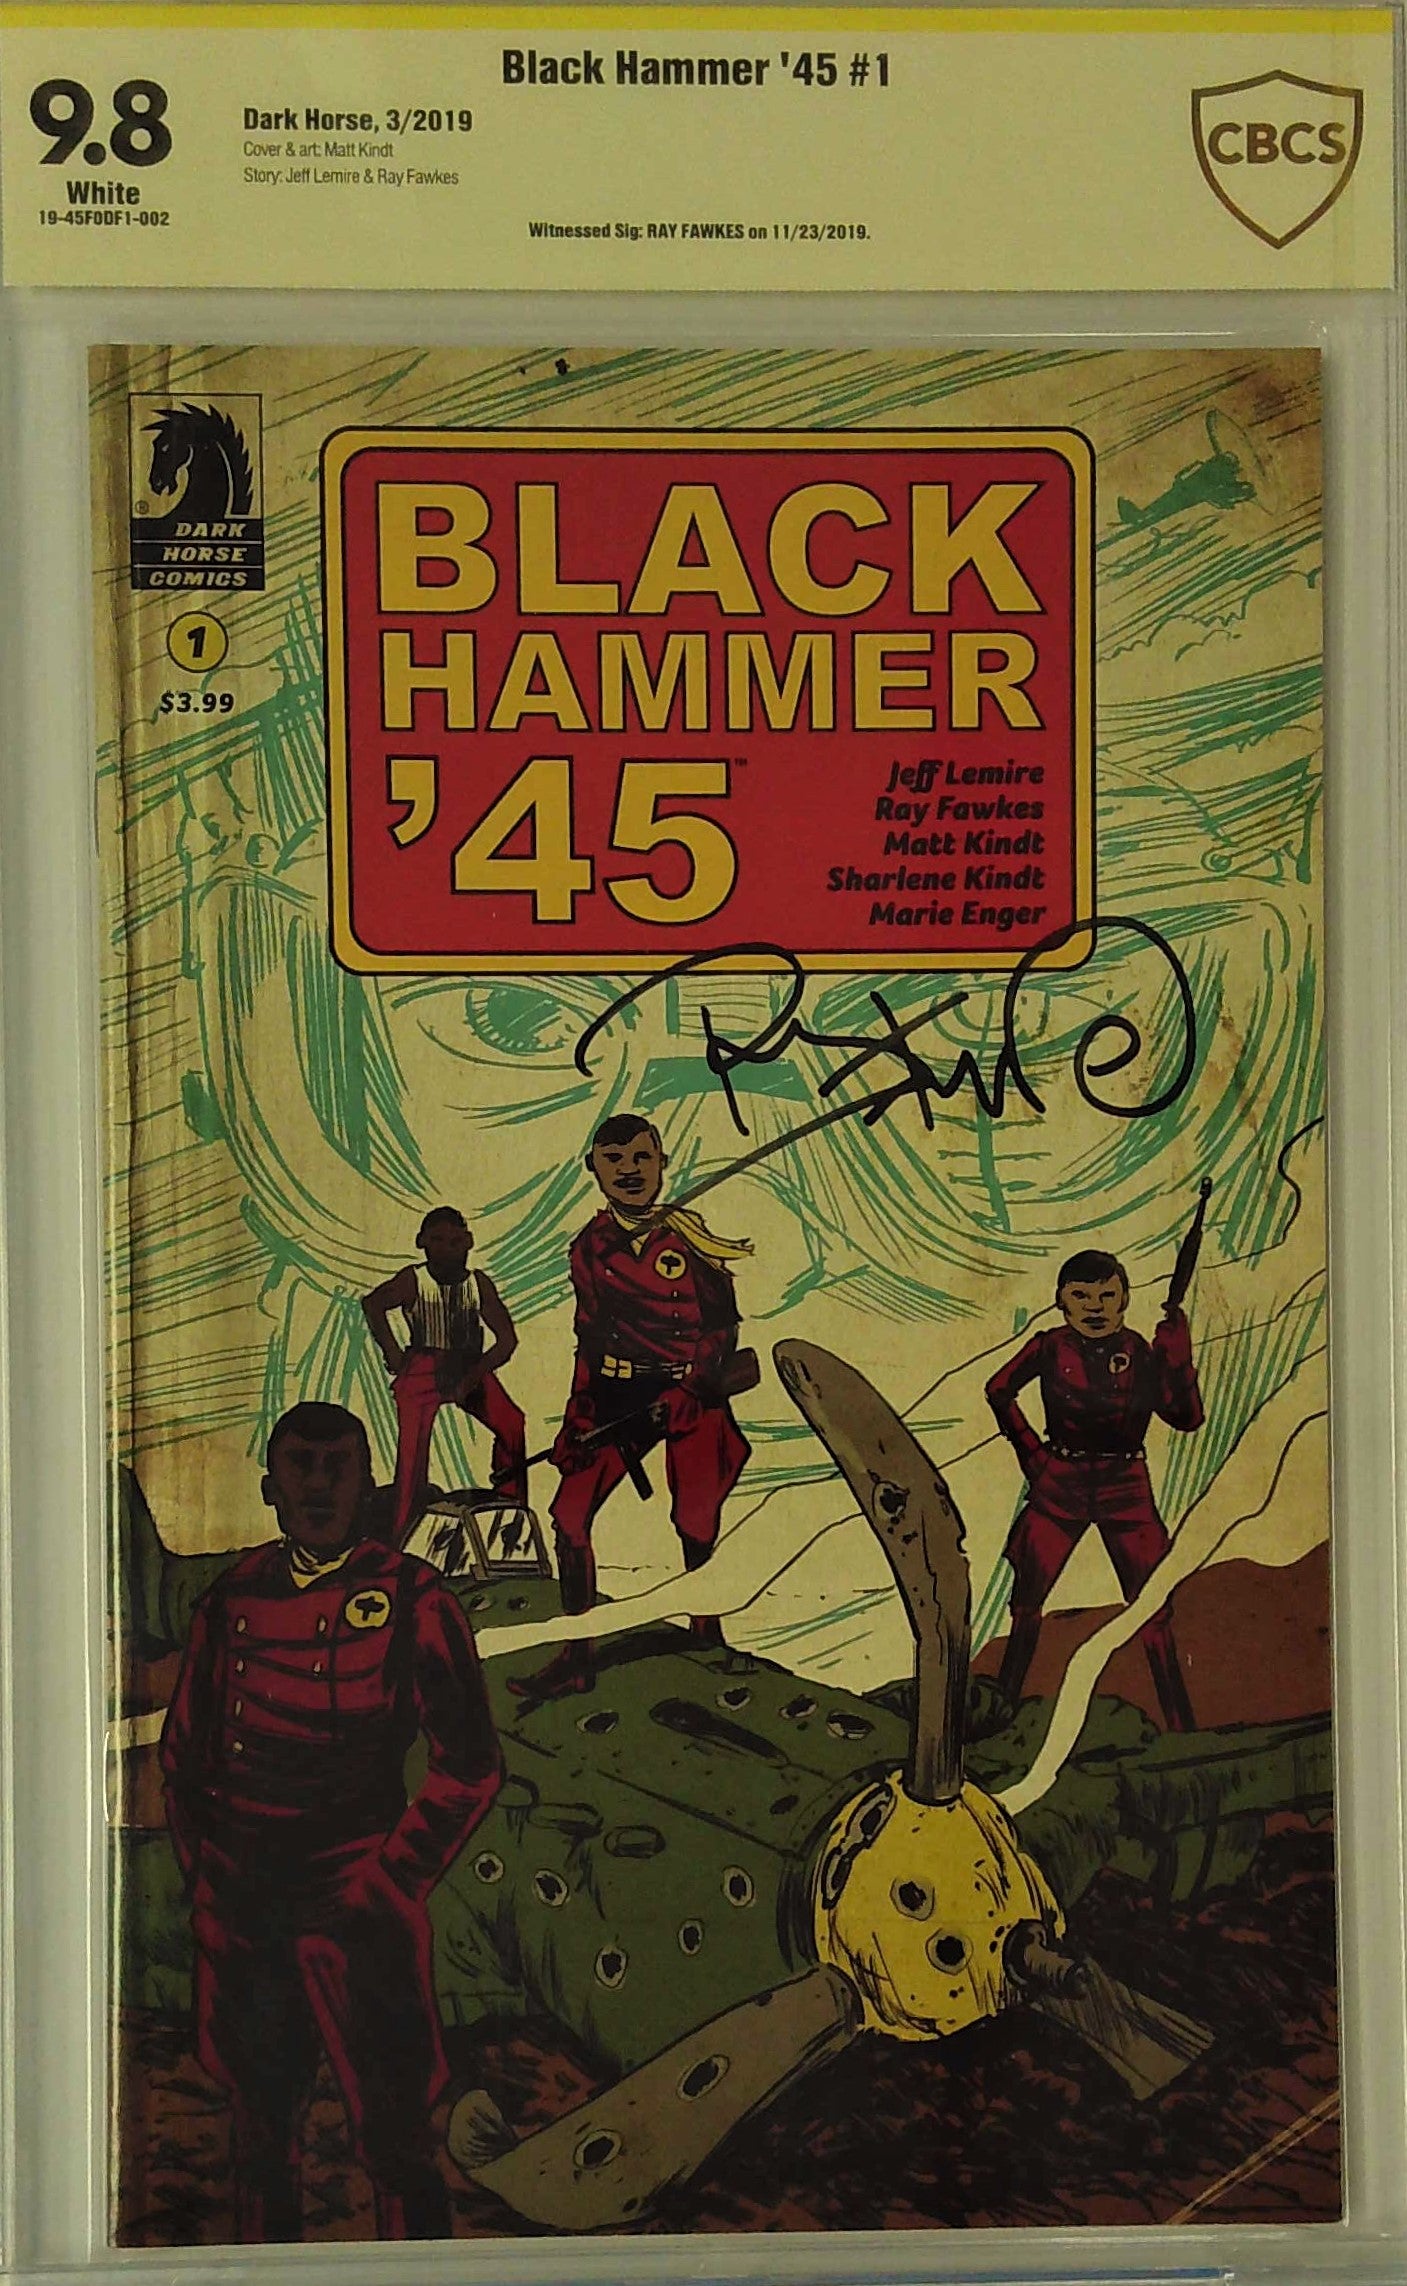 Black Hammer '45 #1 CBCS 9.8 Yellow Label Ray Fawkes